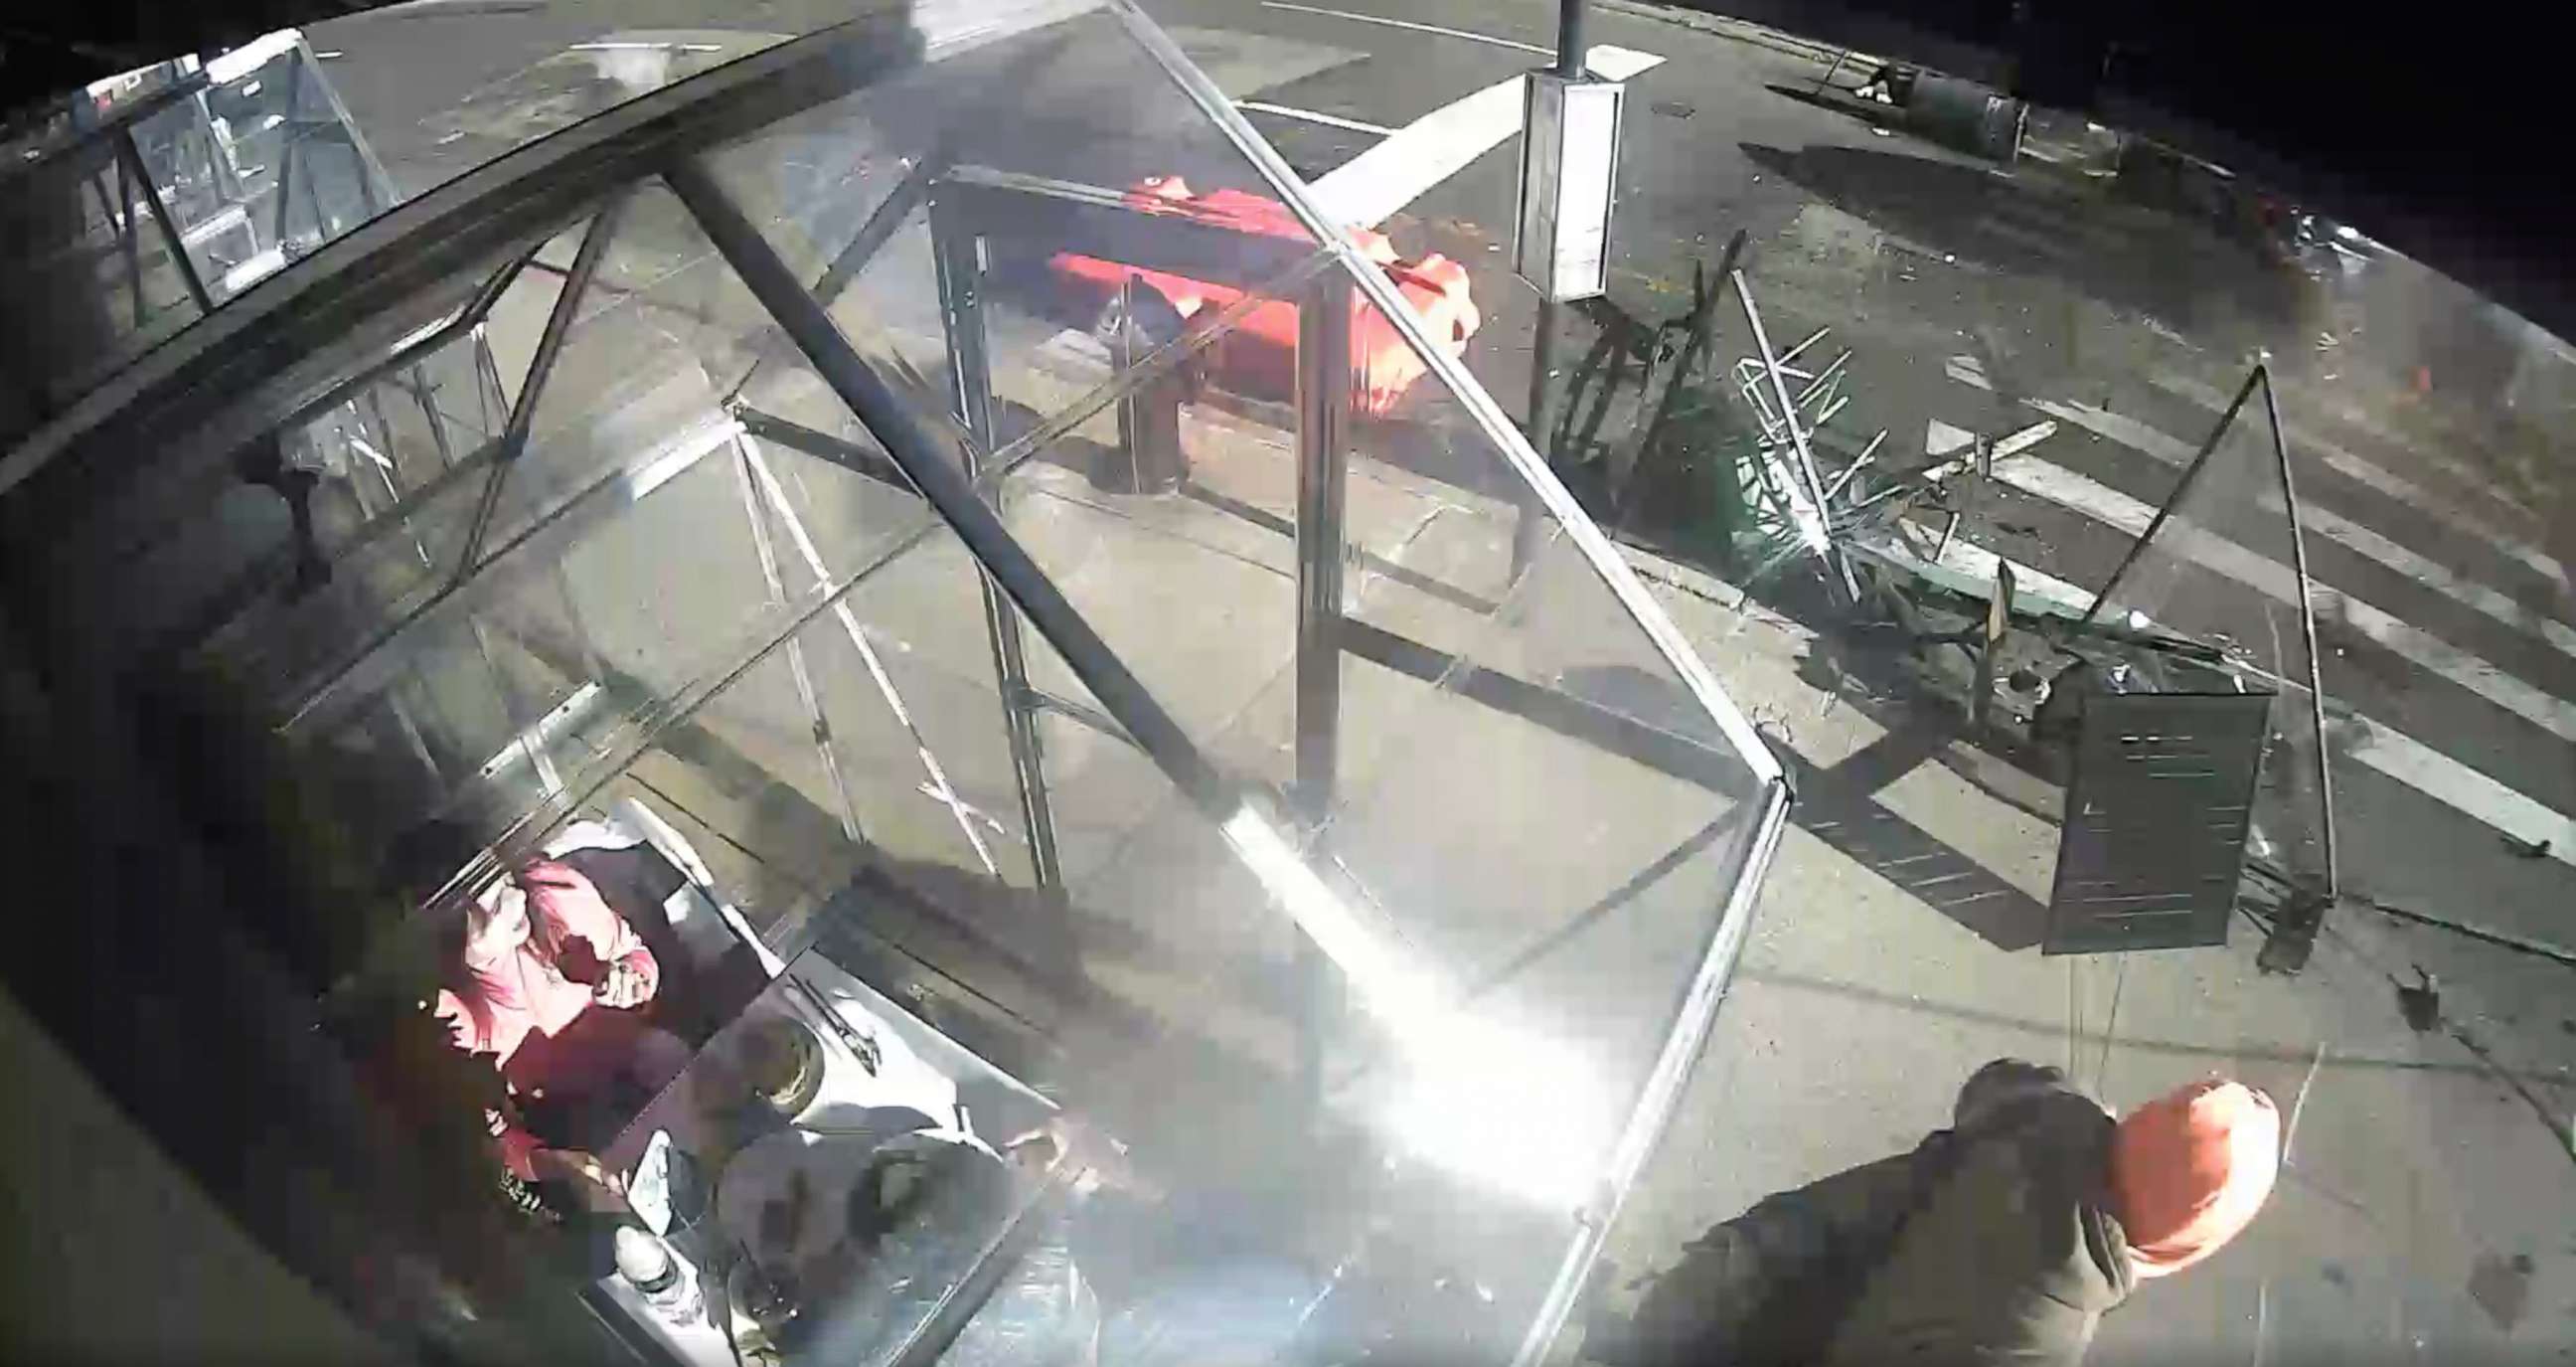 PHOTO: Surveillance video captured a car barreling into an outdoor dining area after a crash in New York City, March 5, 2021.